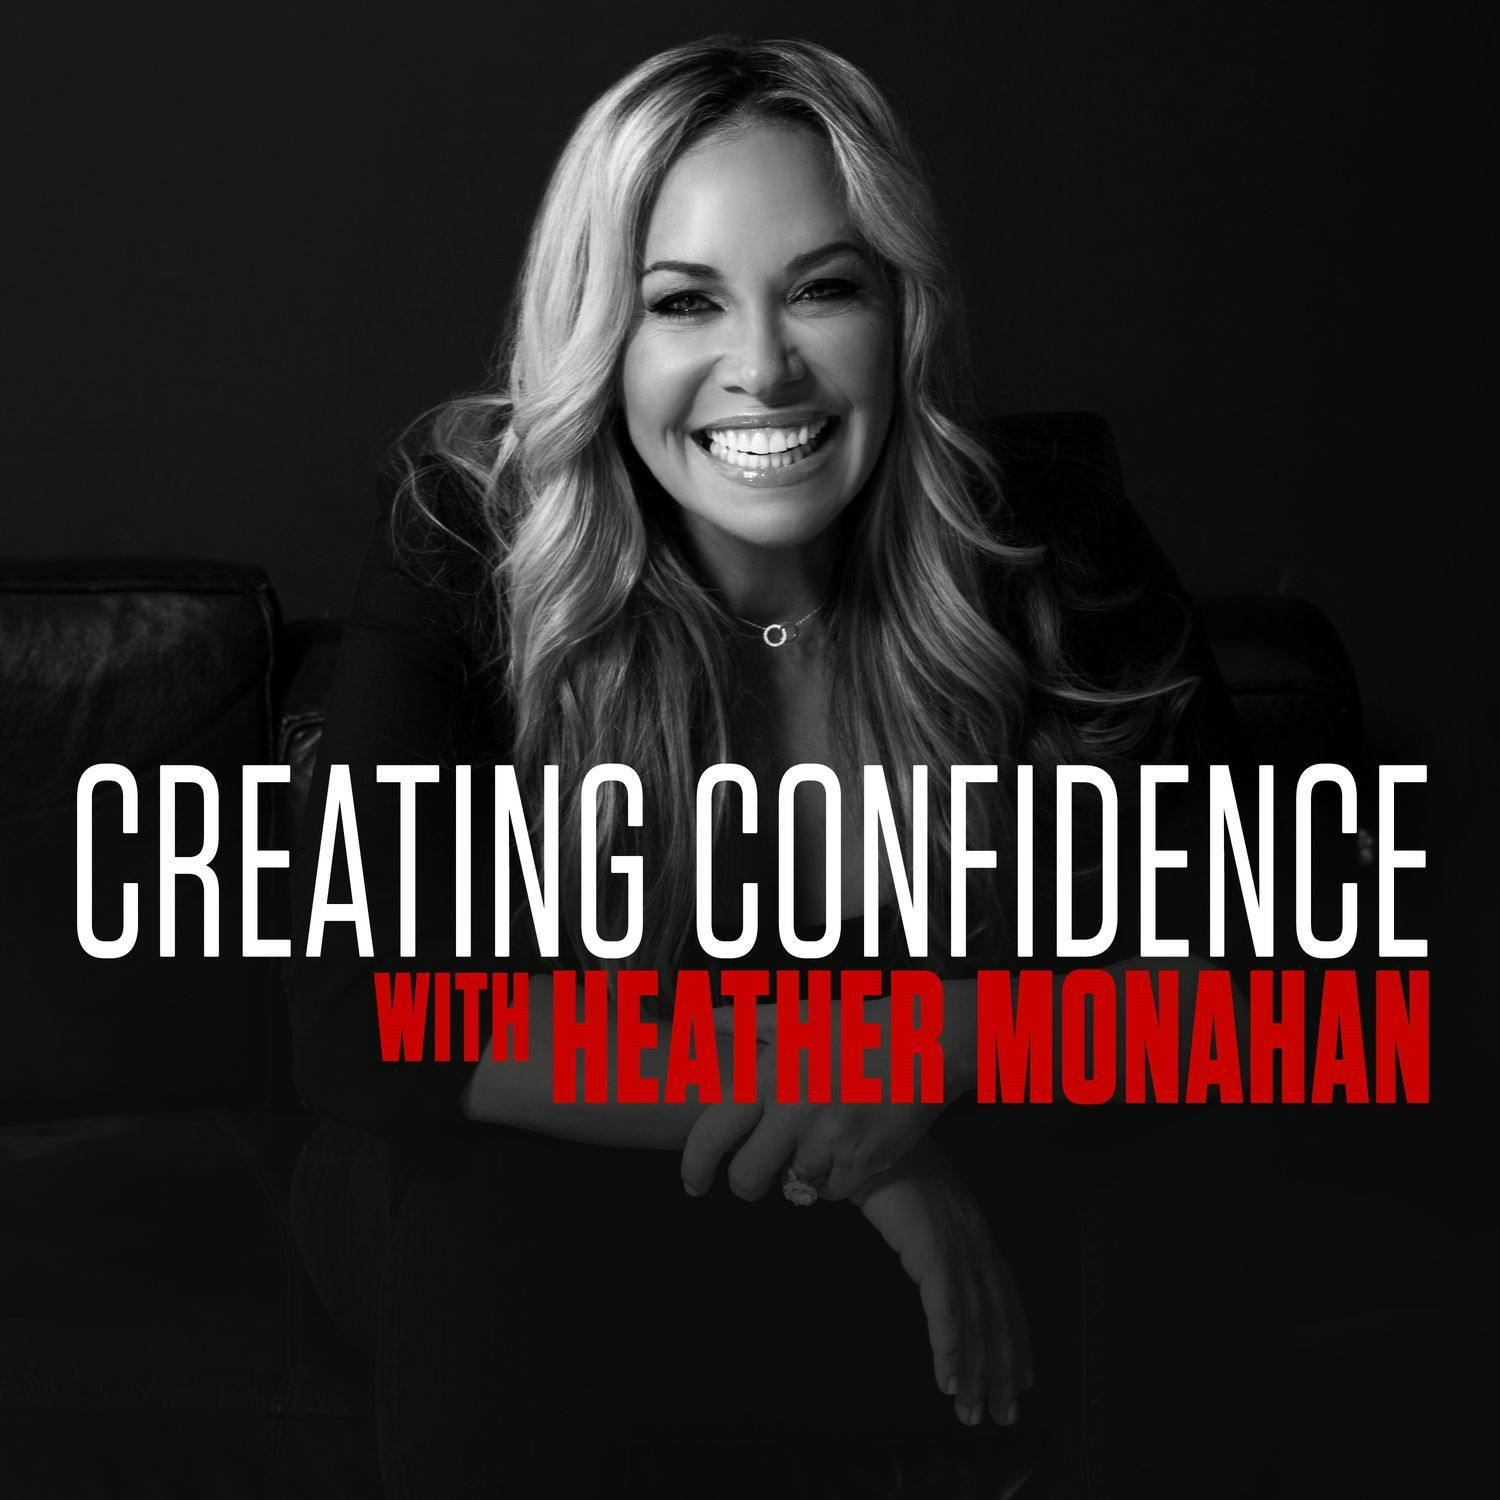 #185: AWAKEN To Your True Self and Rewrite Your Story with Ian Morgan Cron Bestselling Author and Enneagram Teacher by Heather Monahan | YAP Media Network